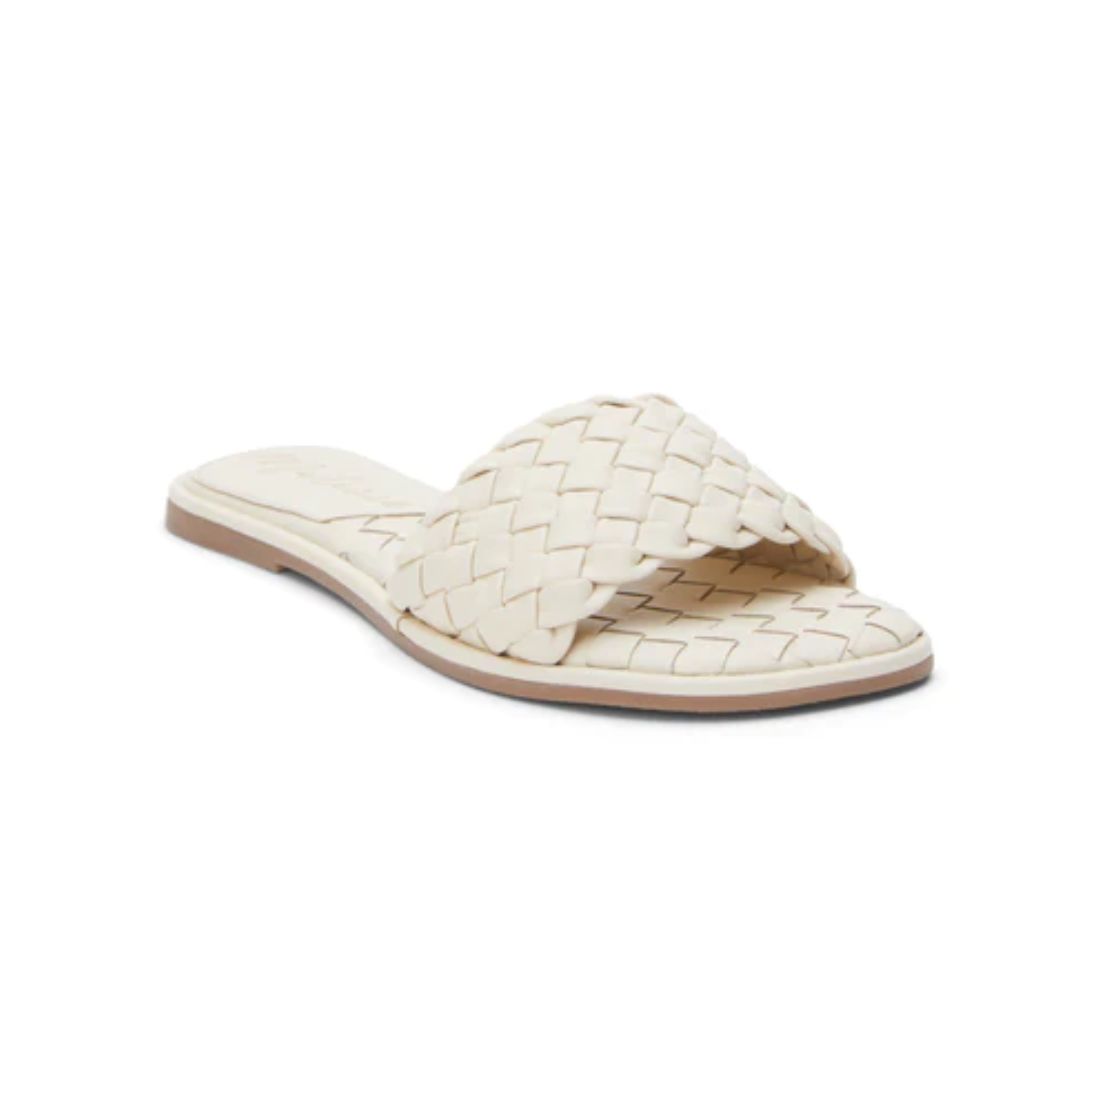 Matisse Shana Slide in Ivory | Cotton Island Women's Clothing Boutique